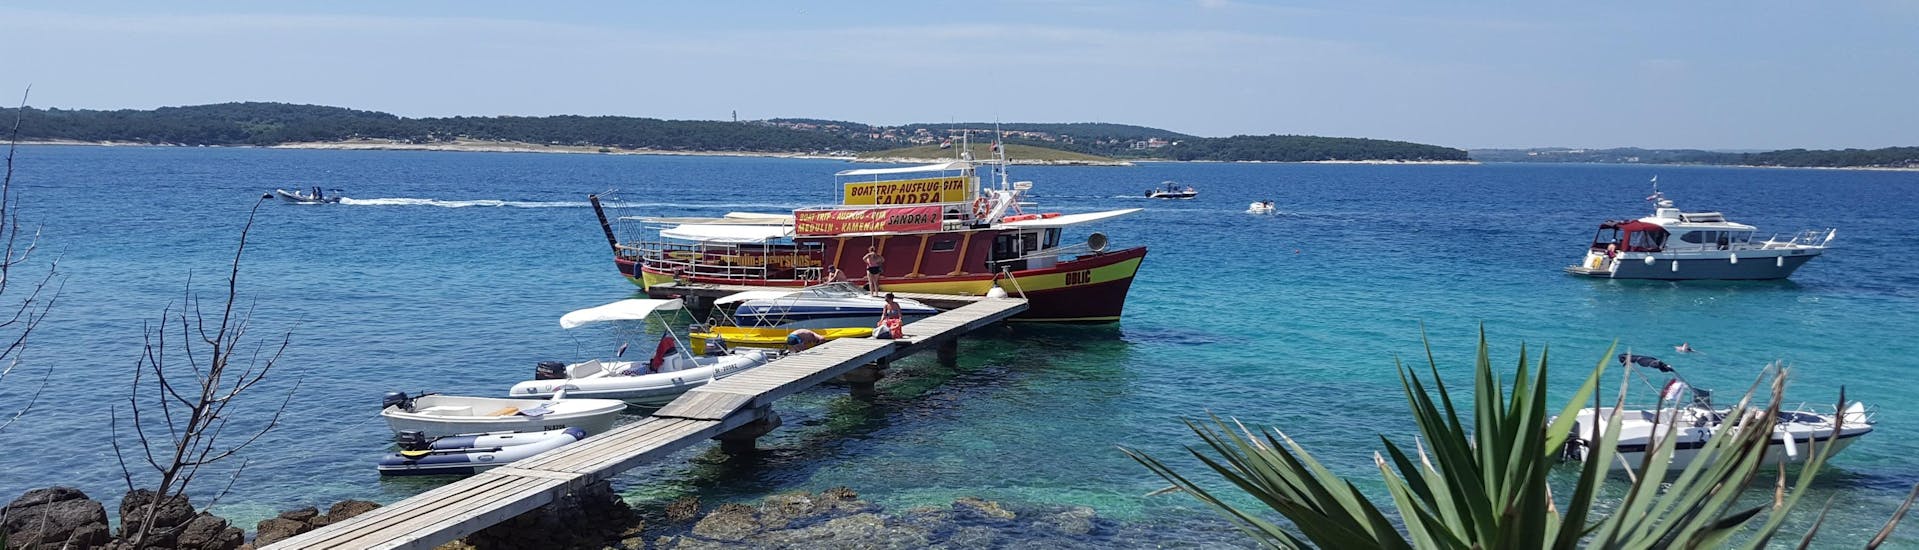 The boat from Medulin Excursions is moored at the pier as people get on board for the Boat Trip to Cape Kamenjak from Medulin with Swimming.